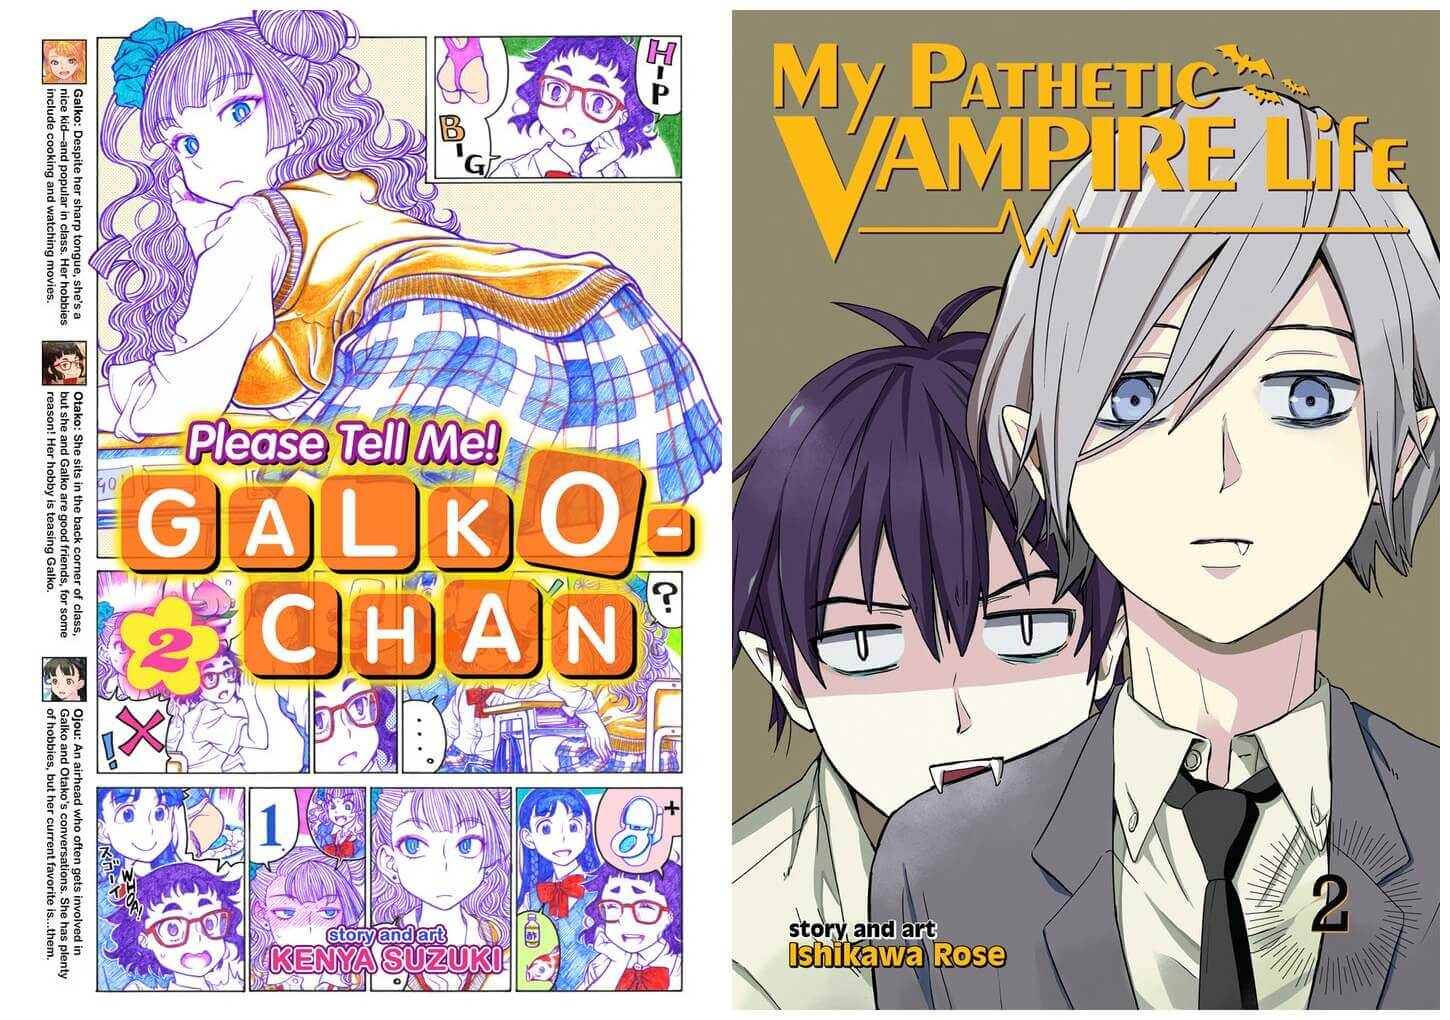 February 2017 Manga Releases Covers for Please Tell Me Galko-chan and My Pathetic Vampire Life.